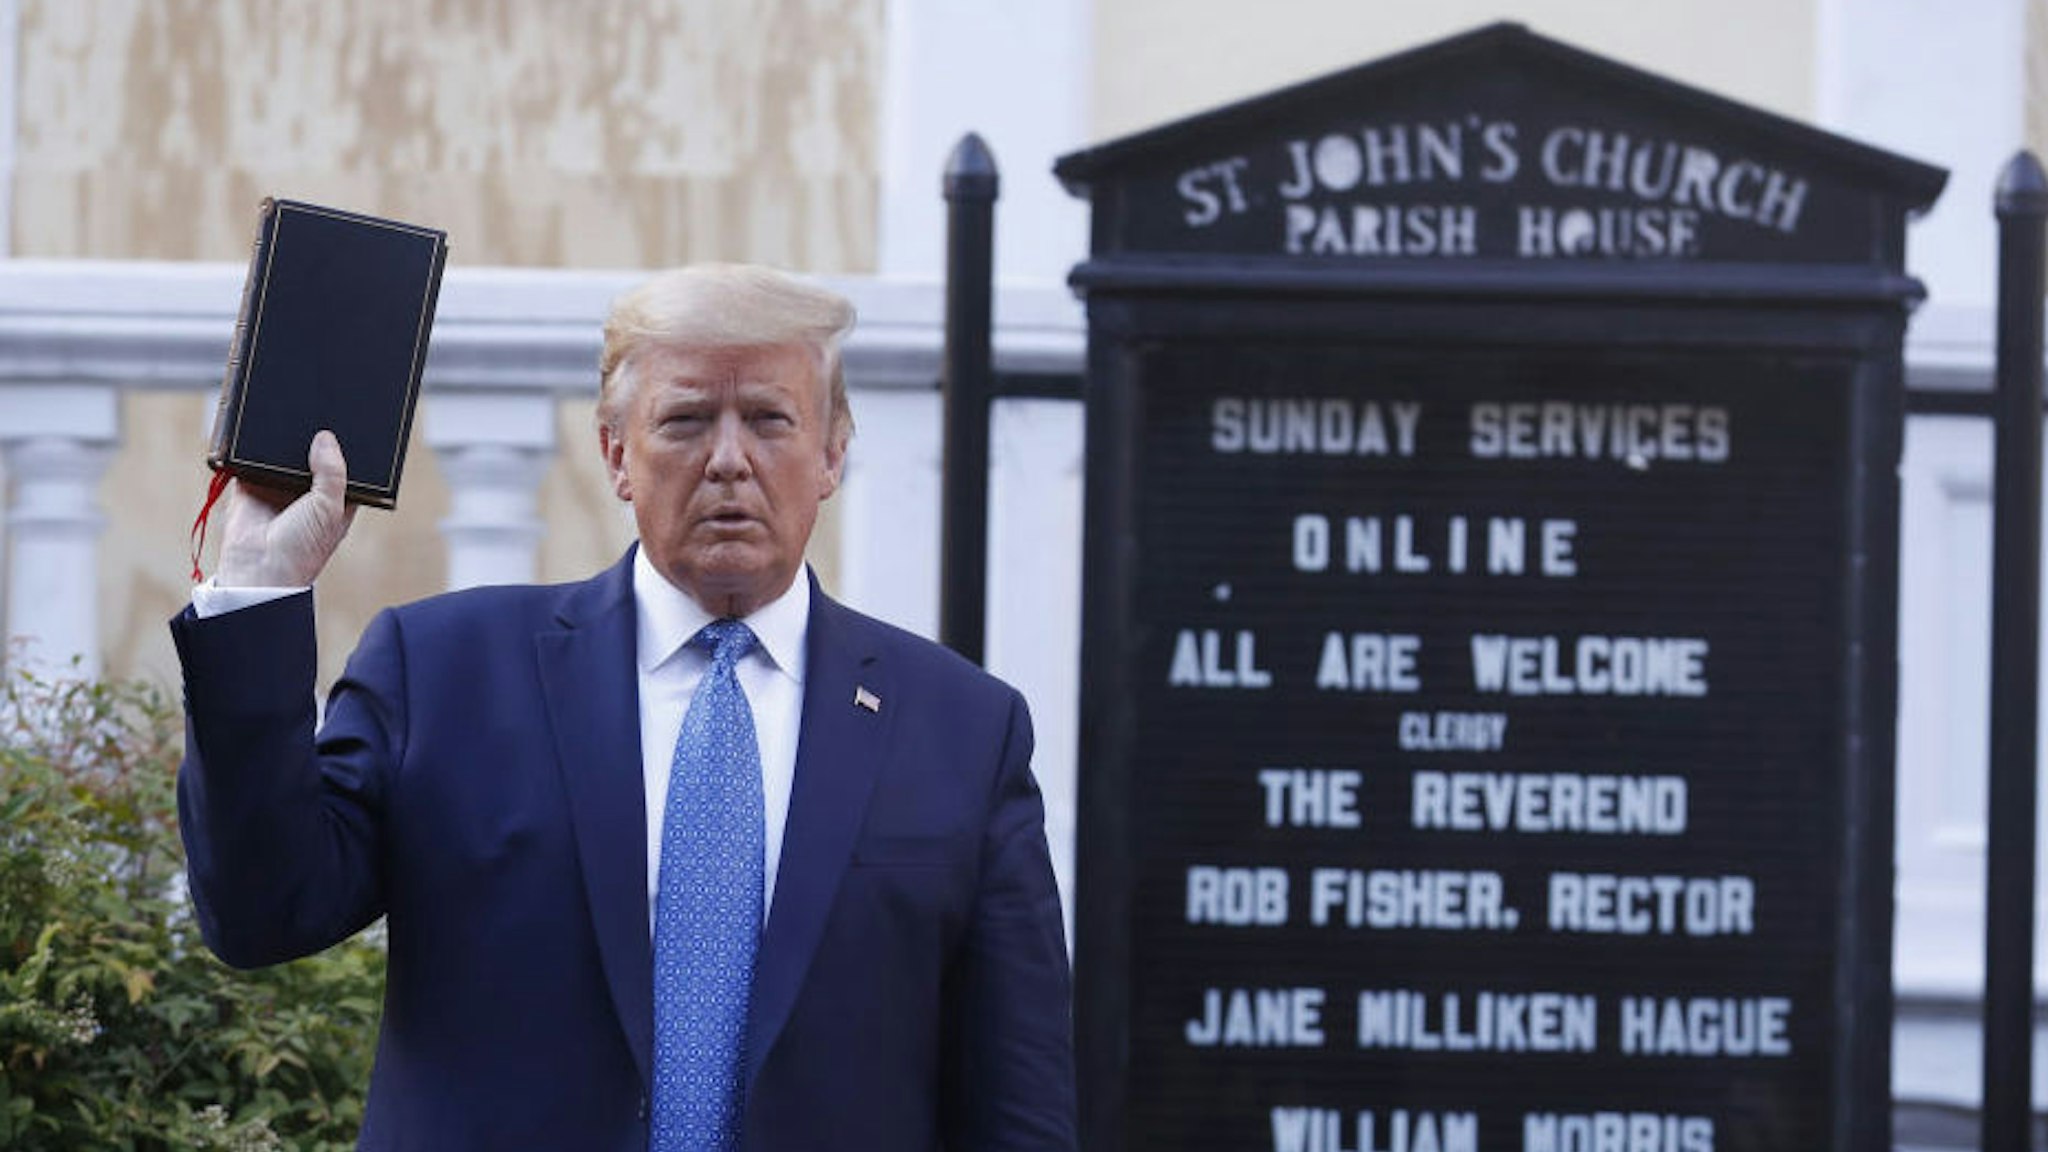 U.S. President Donald Trump poses with a bible outside St. John's Episcopal Church after a news conference in the Rose Garden of the White House in Washington, D.C., U.S., on Monday, June 1, 2020. Trump promised a forceful response to violent protests across the country before leaving the White House to visit a church across the street that had been been damaged by fires. Photographer: Shawn Thew/EPA/Bloomberg